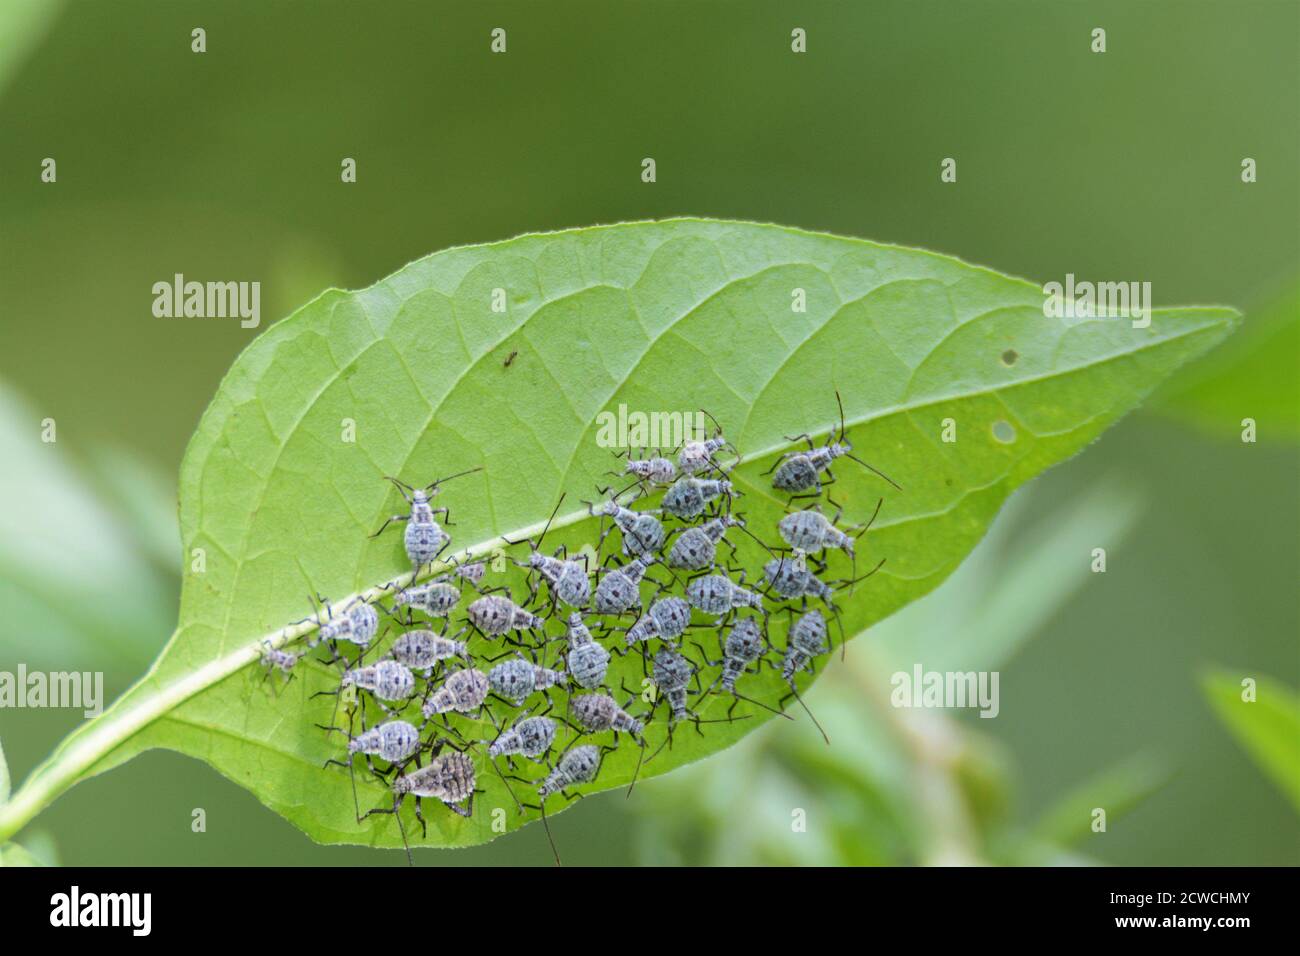 Insects - A group of insect under green leaf Stock Photo